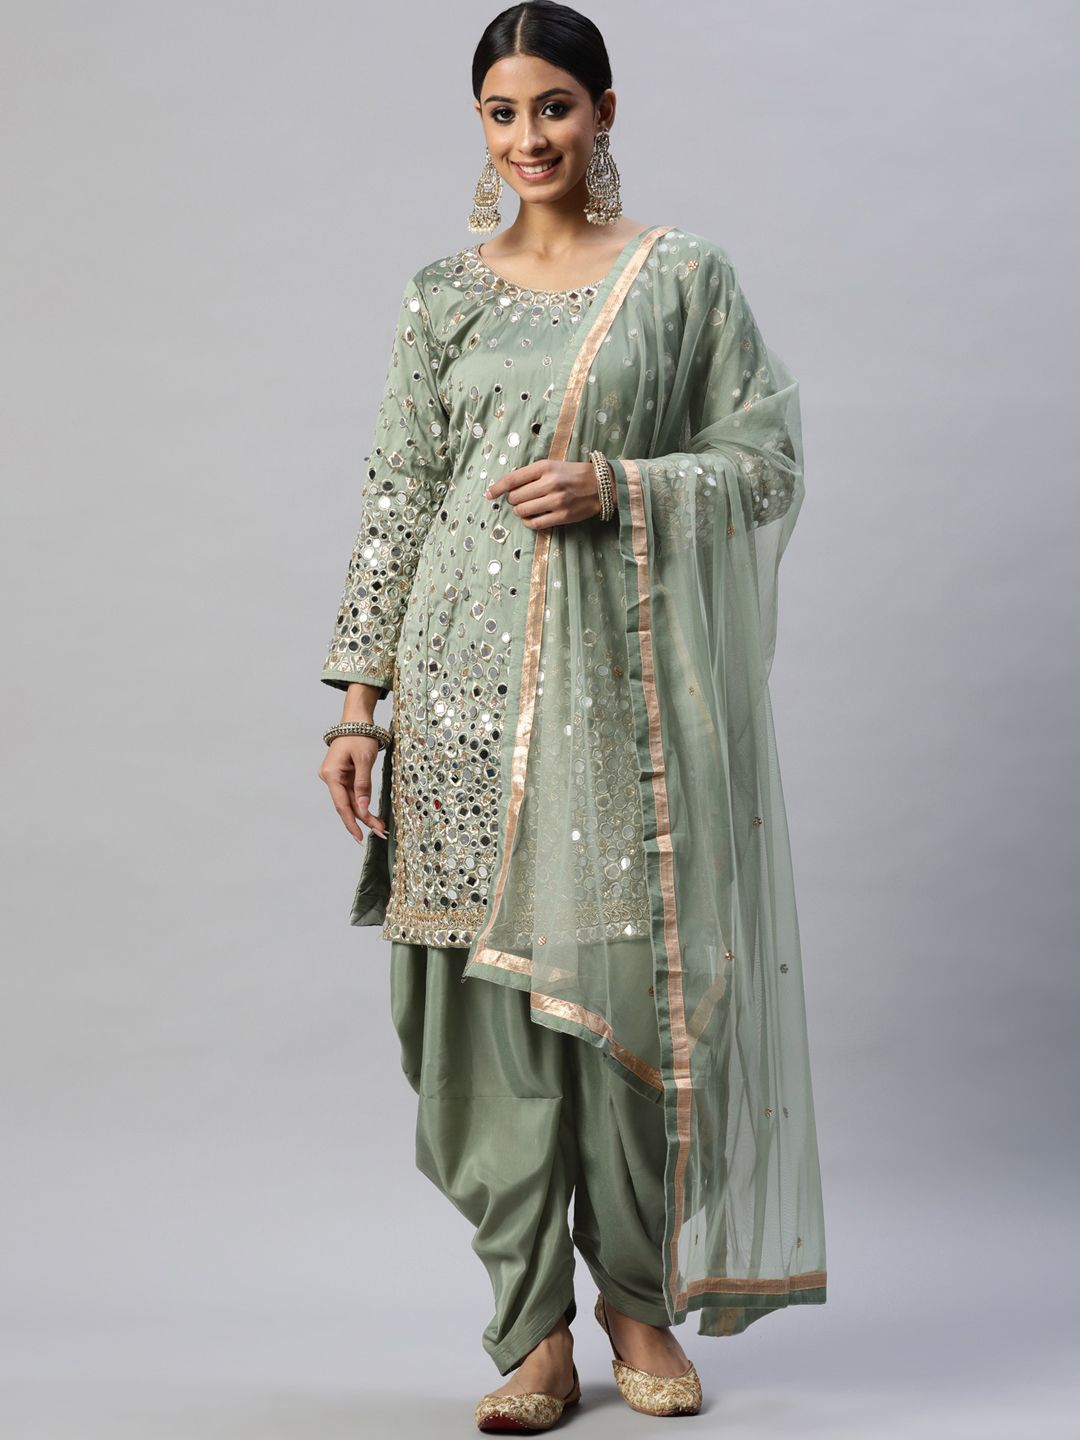 Readiprint Fashions Green & Golden Embroidered Semi-Stitched Dress Material Price in India